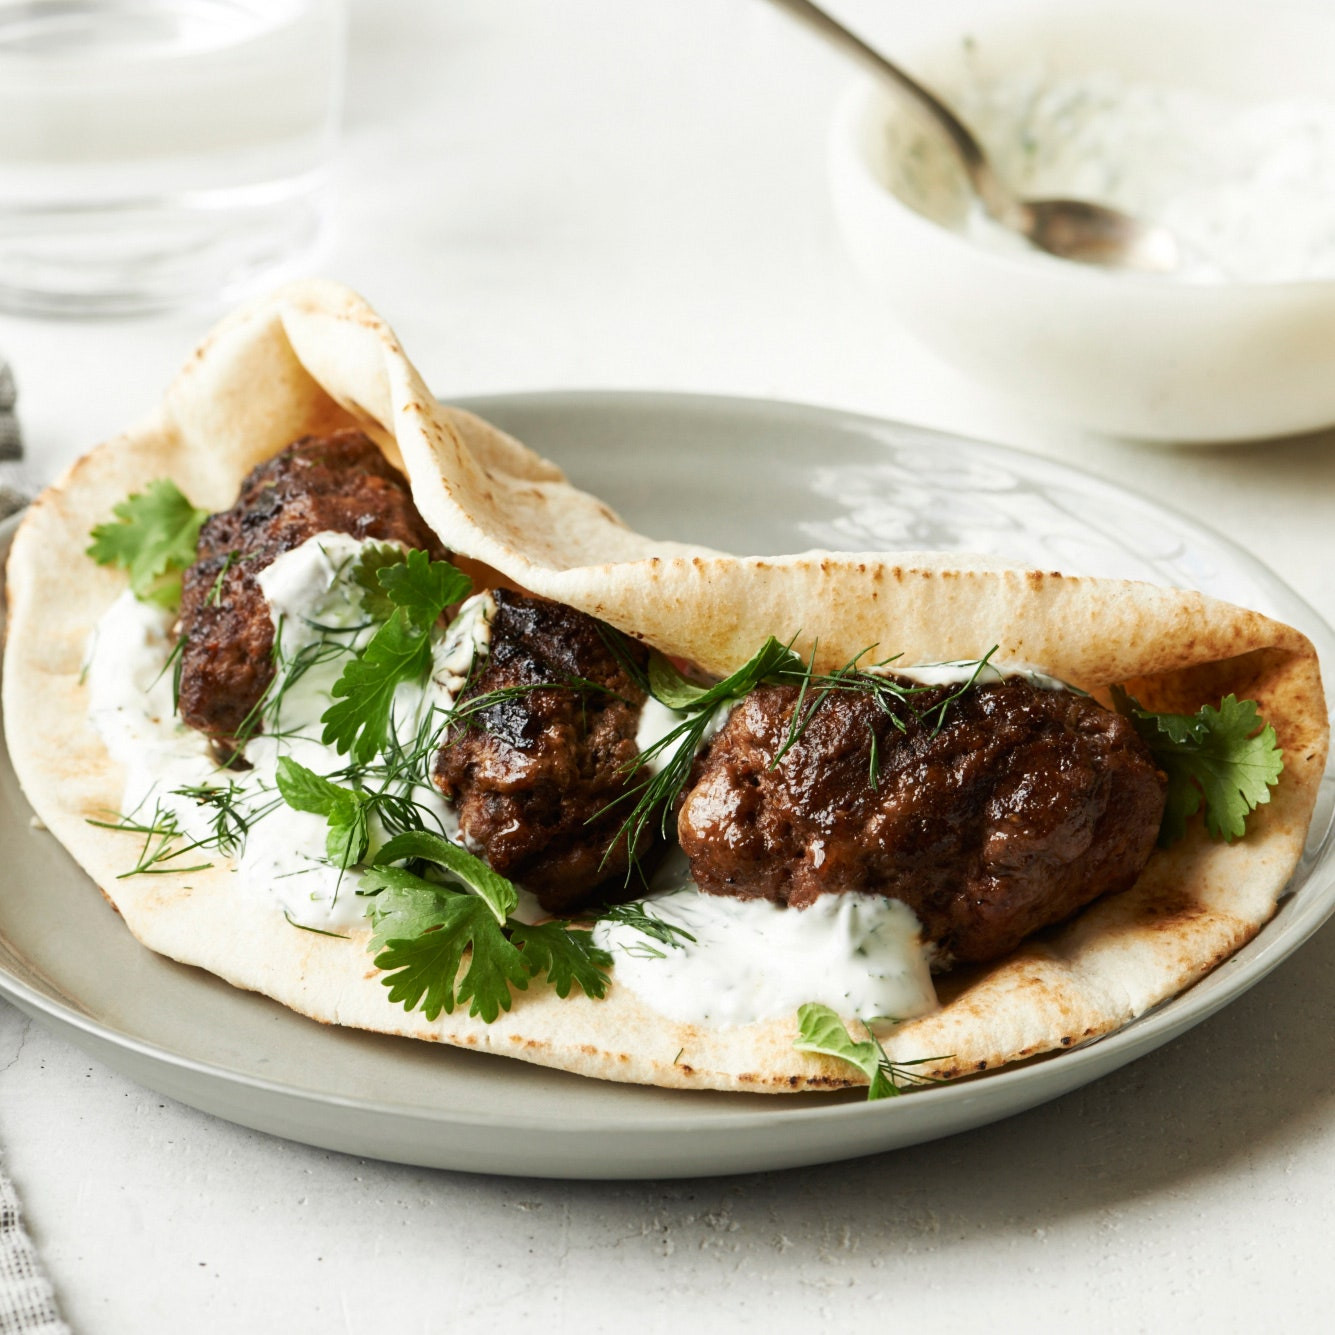 Middle Eastern Food Recipes
 Spiced Middle Eastern Lamb Patties with Pita and Yogurt